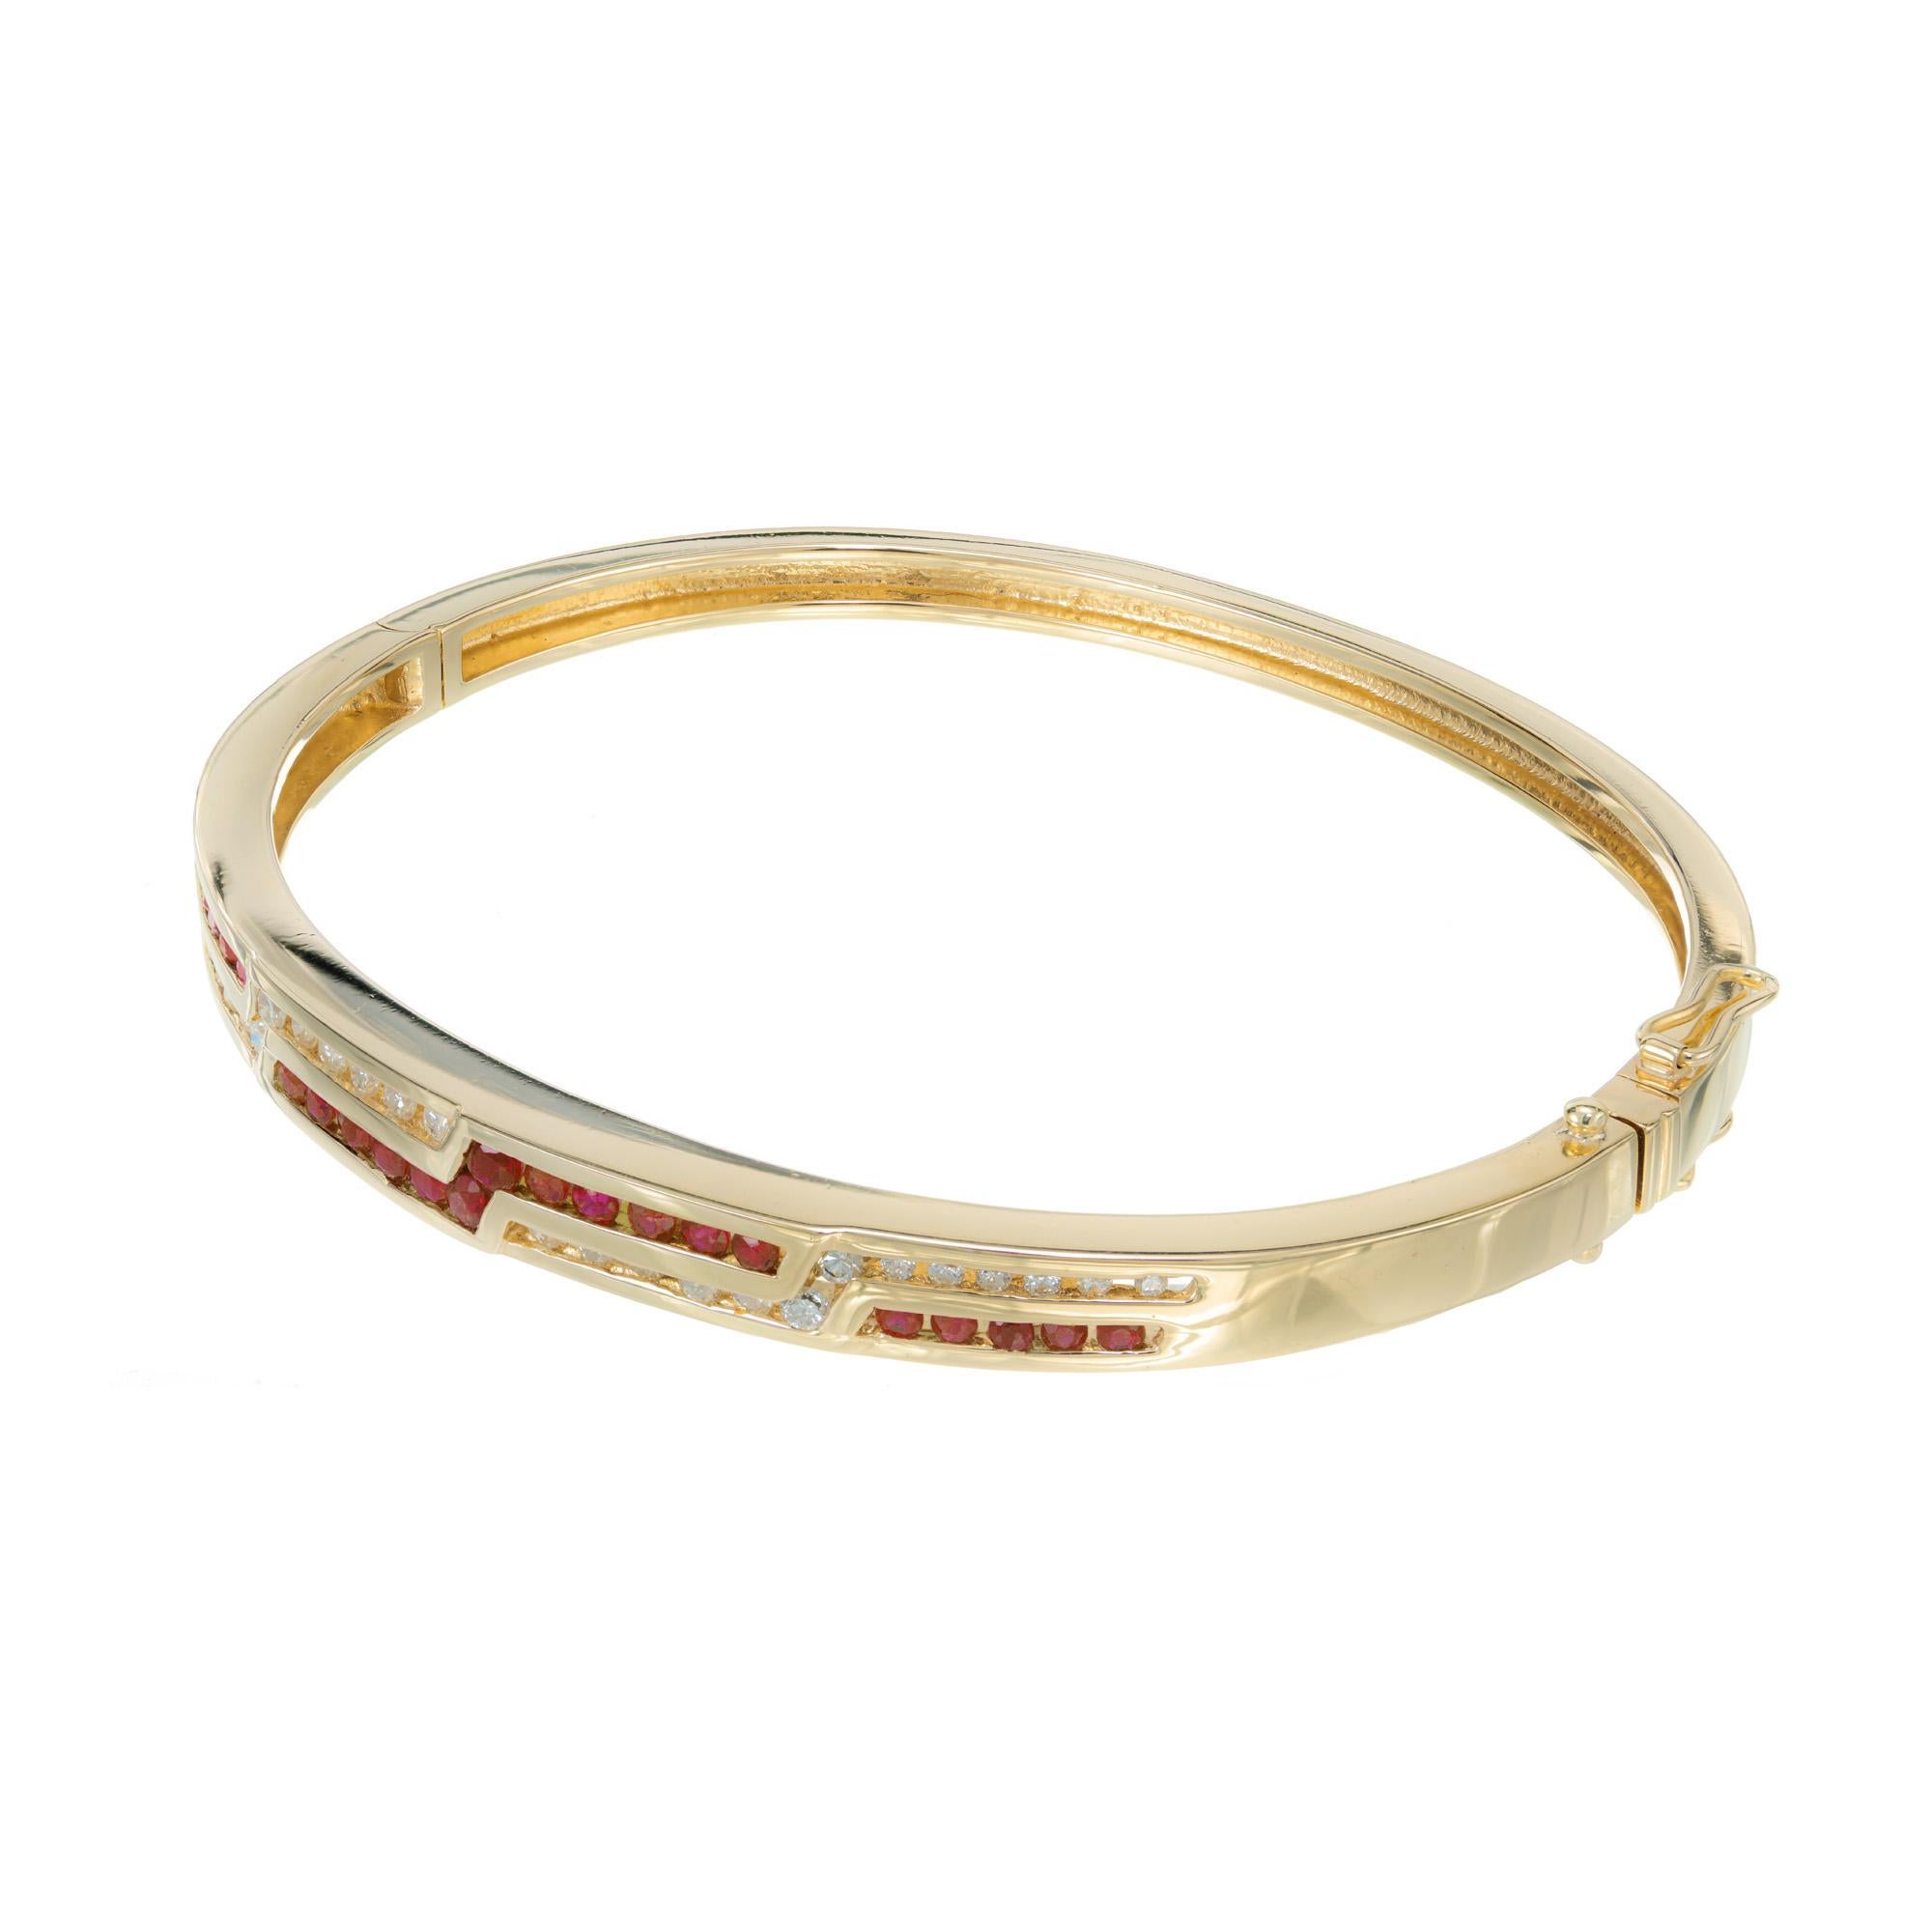 Diamond and ruby 14k yellow gold bangle bracelet. 26 round diamonds with 22 round rubies, channel set. Hinged bangle bracelet with an angular design. 7 inches

26 round diamonds, G-H VS-SI approx. .40cts
22 round red rubies, approx. .40cts
14k